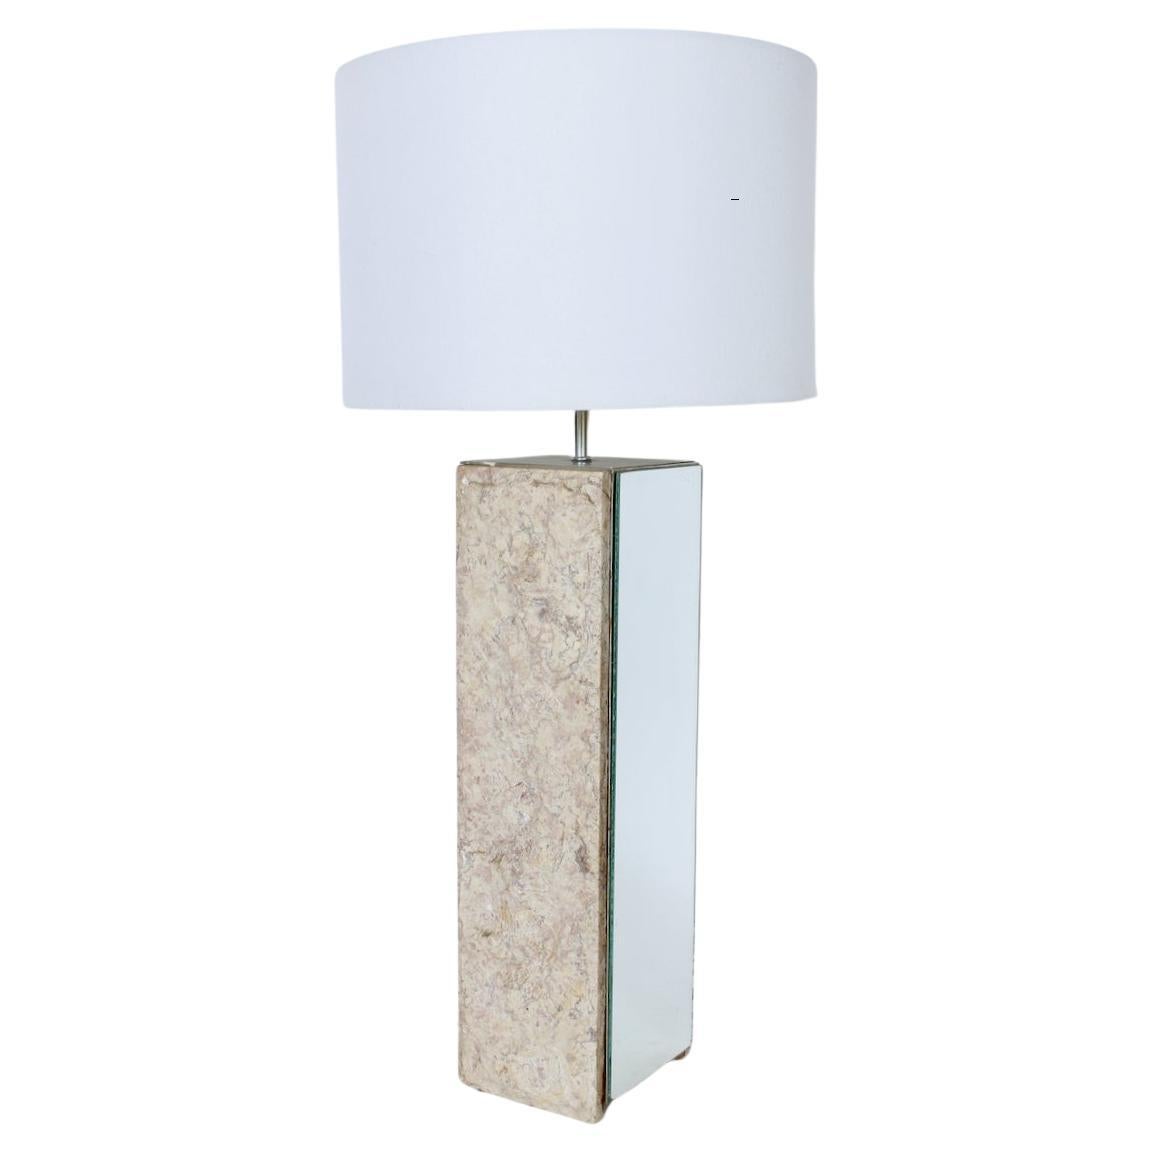 Substantial Laurel Lamp Co. Travertine and Mirror Table Lamp, 1960s For Sale